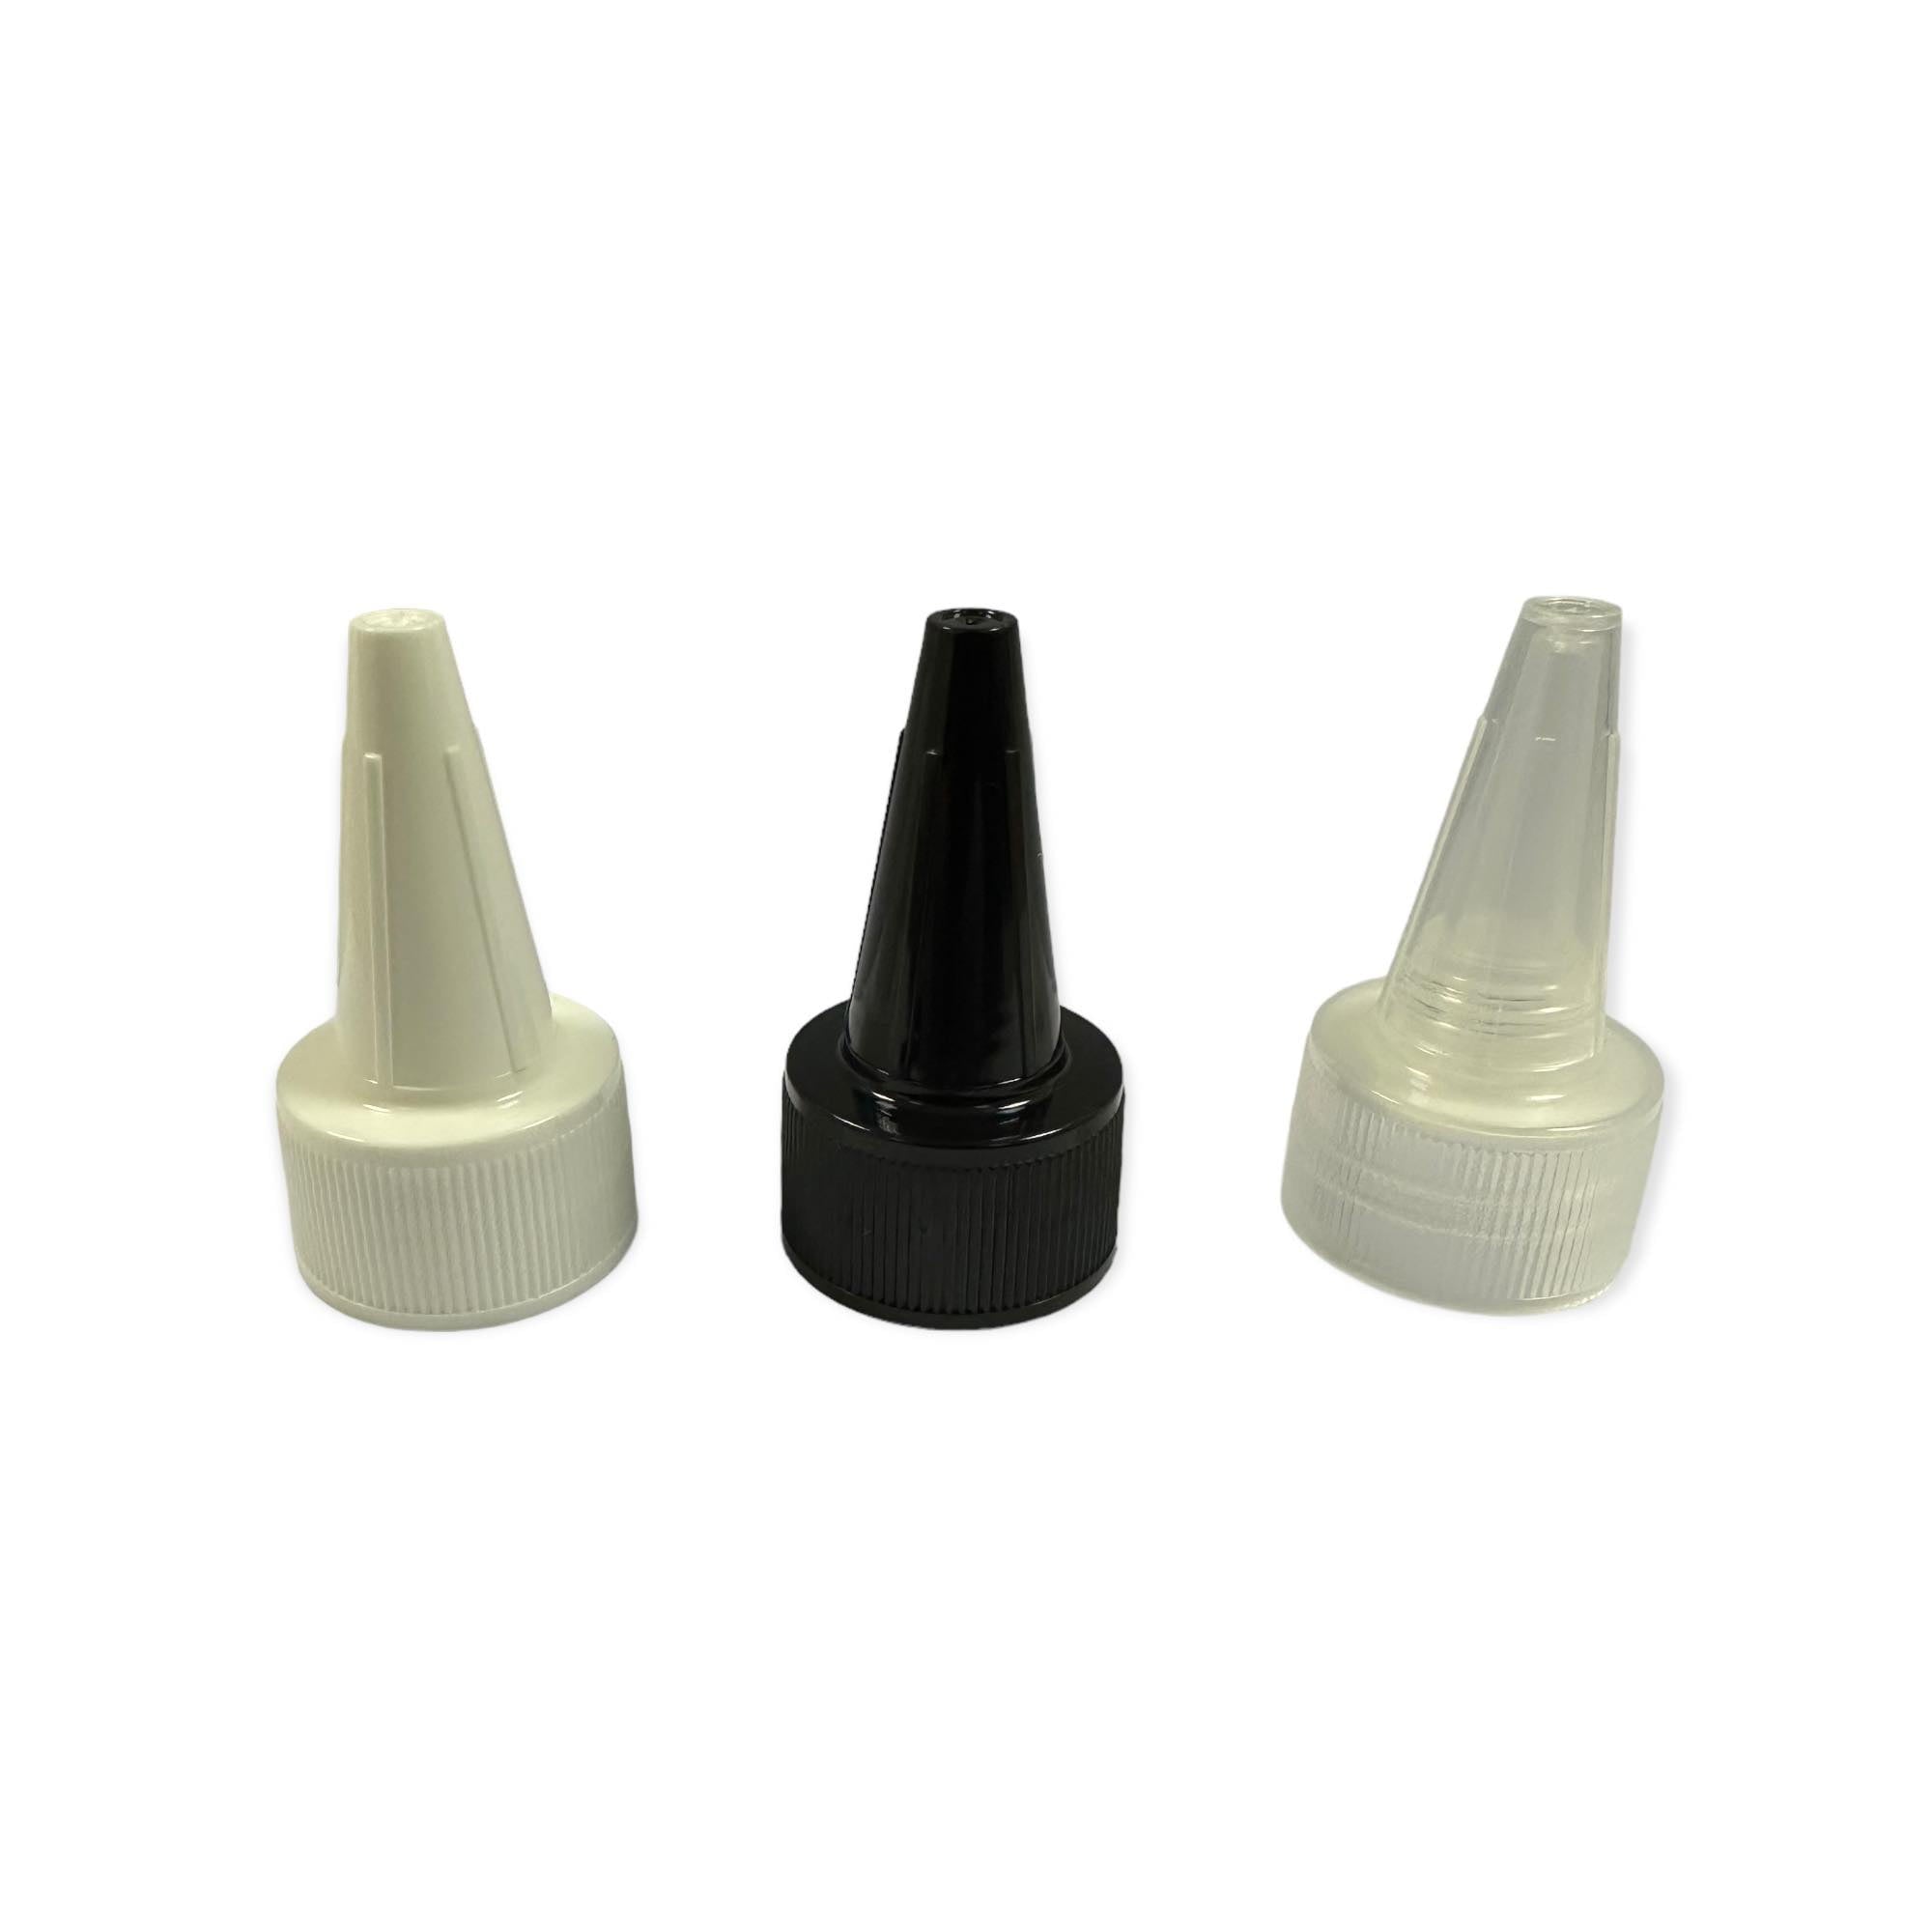 24mm Spout Cap ( Fits Our 100ml And 250ml Bottles )